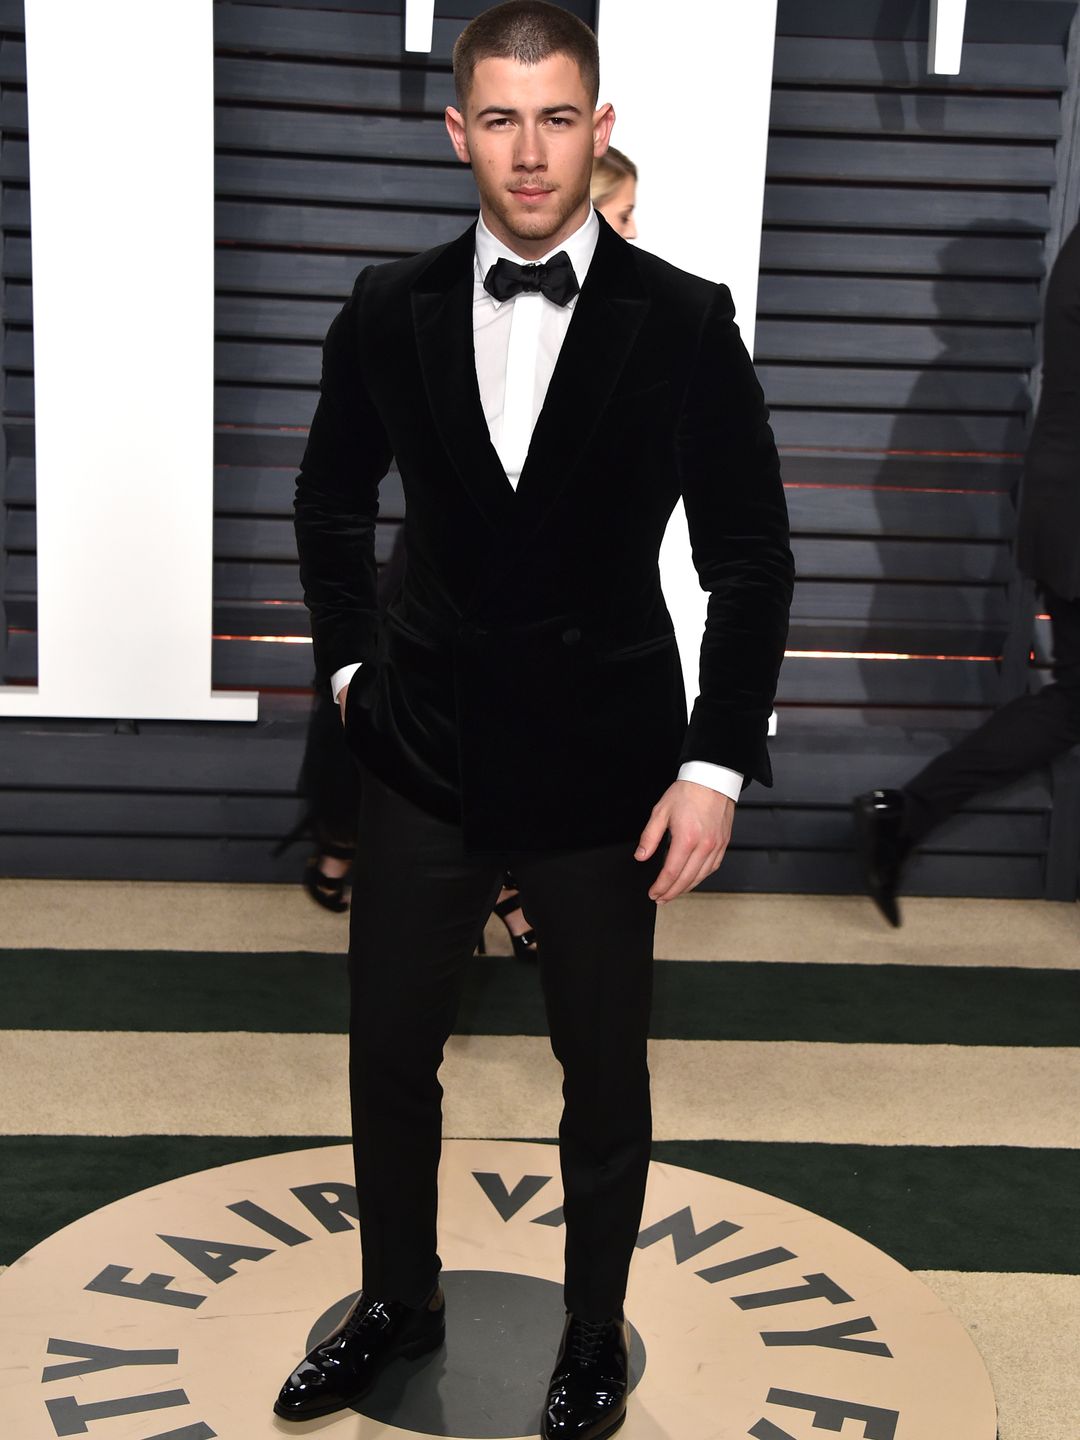 Nick stood in a suit at the Vanity Fair Oscars after party